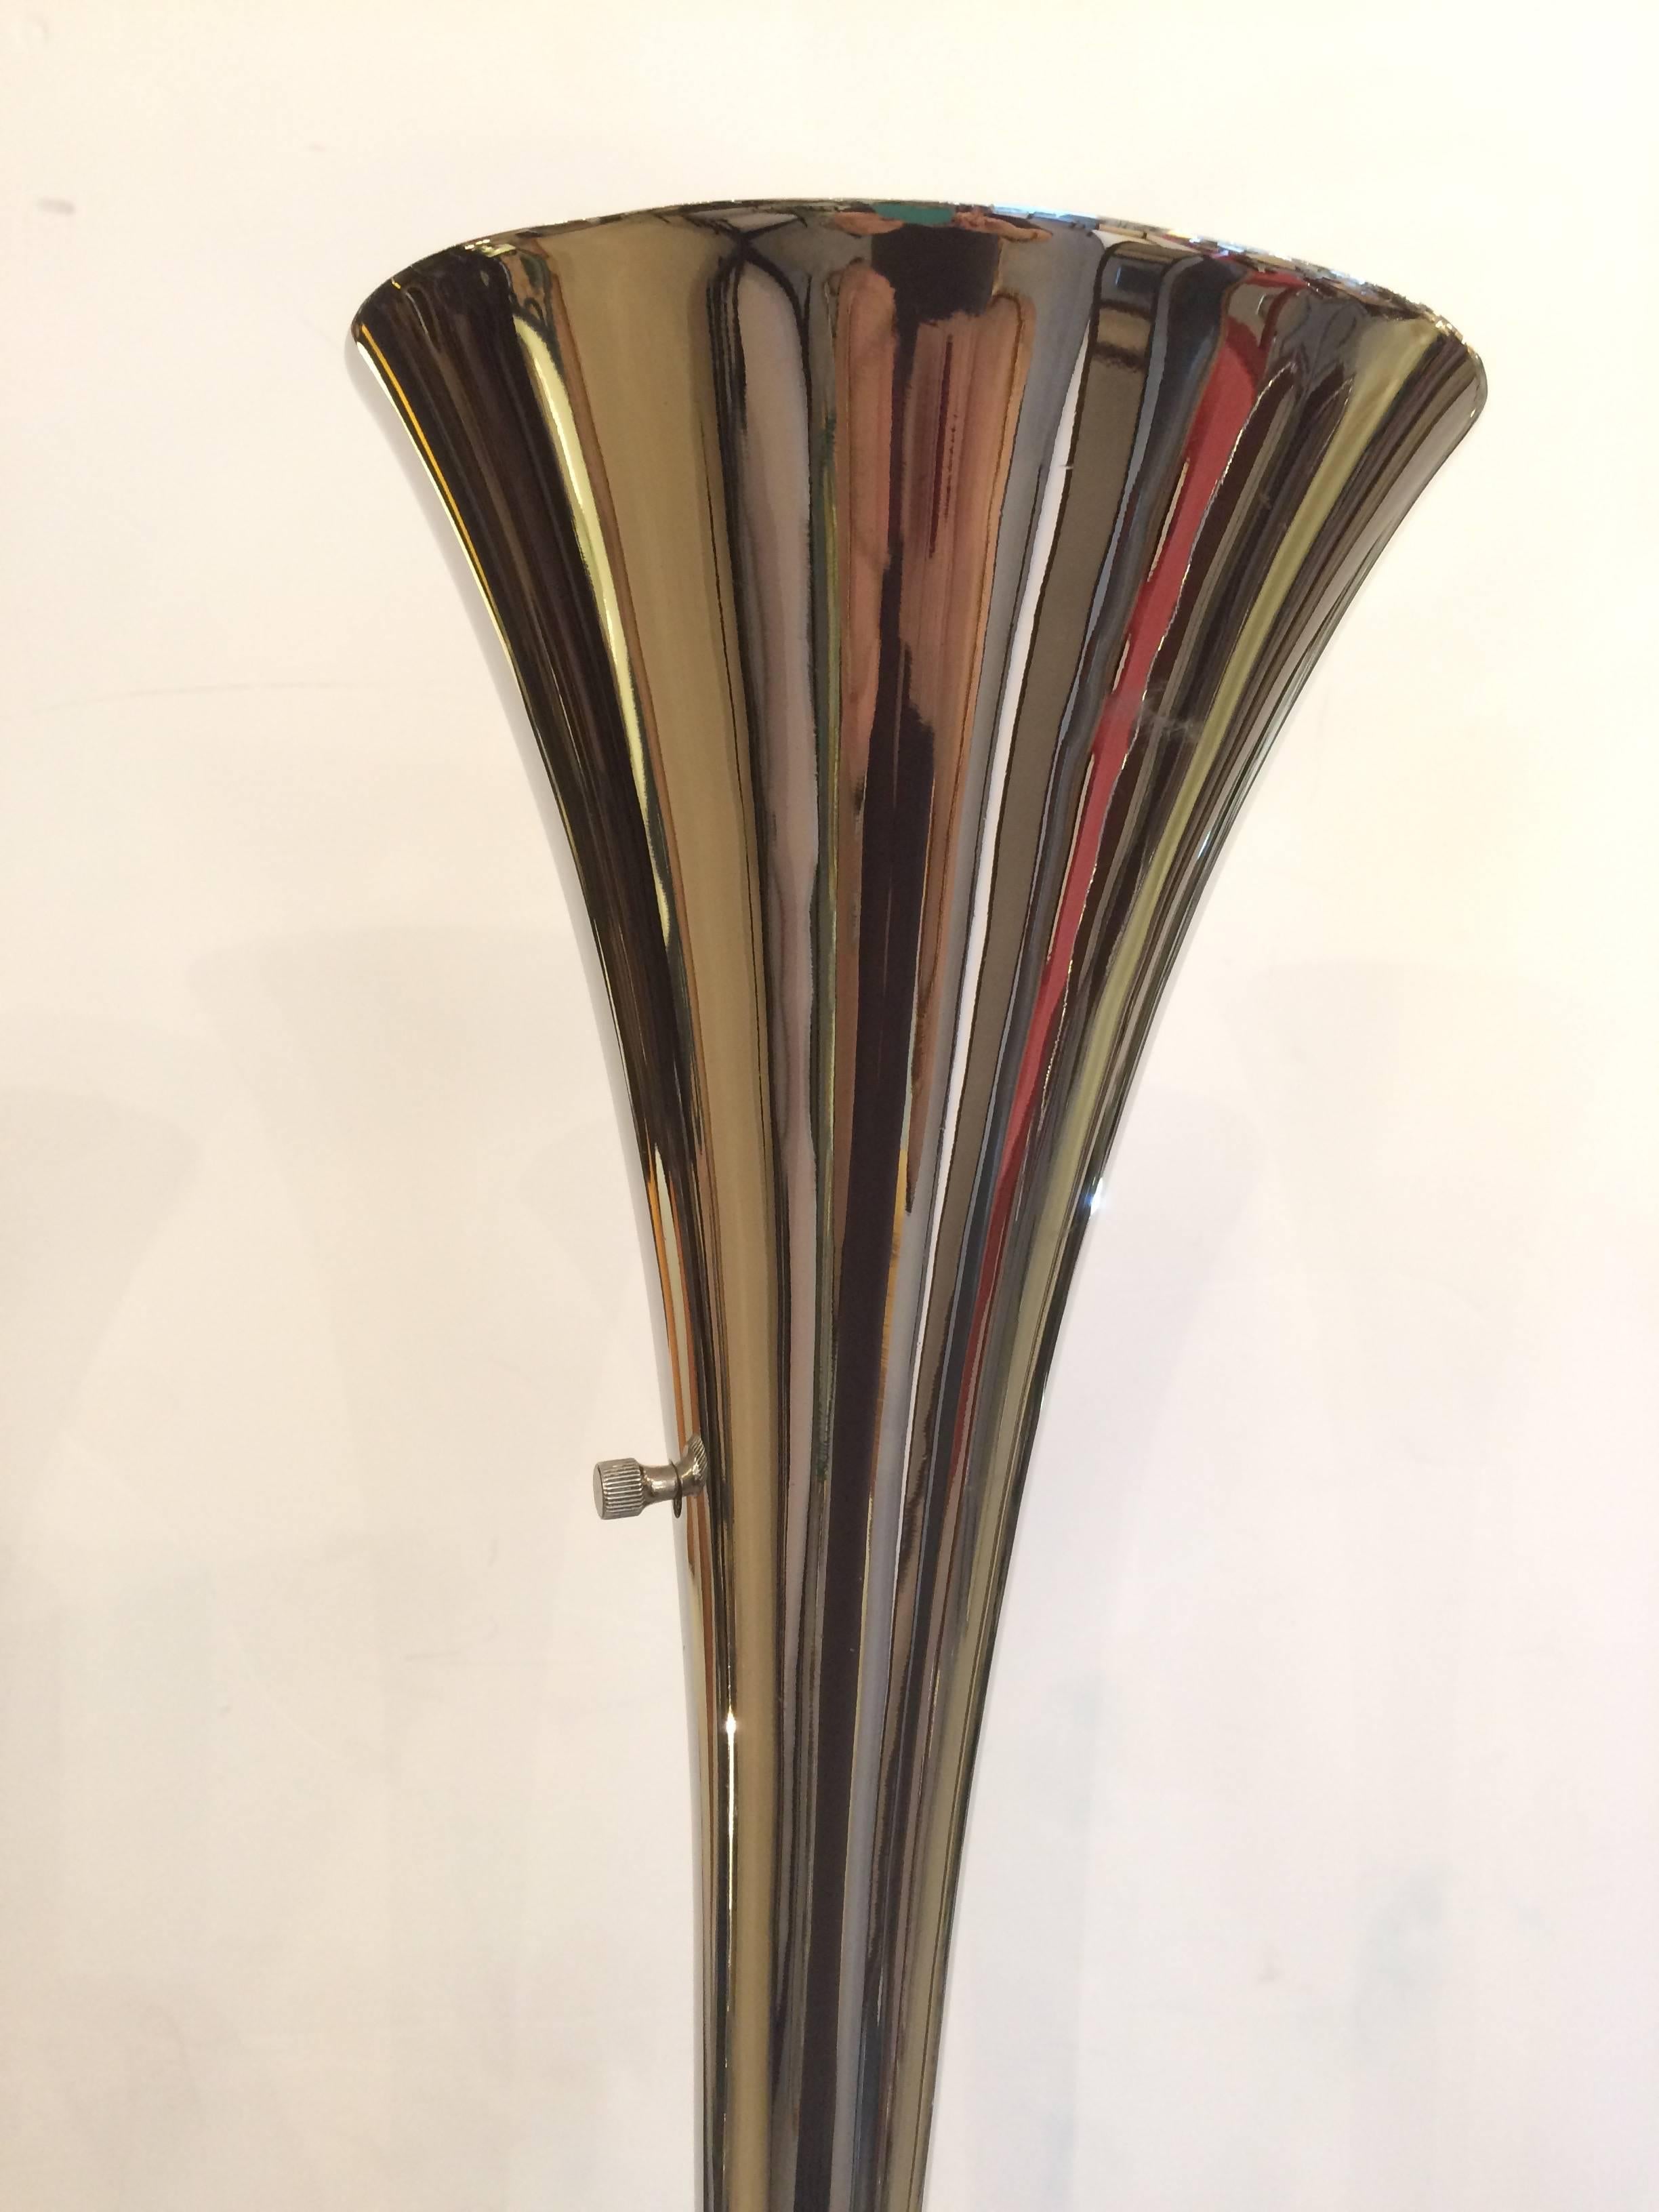 Two sleek sophisticated floor lamps with classic mid century design, elongated and shaped like a horn. By Laurel Lamp Company and newly refurbished in a stunning nickel finish. Top is 7.25 W.